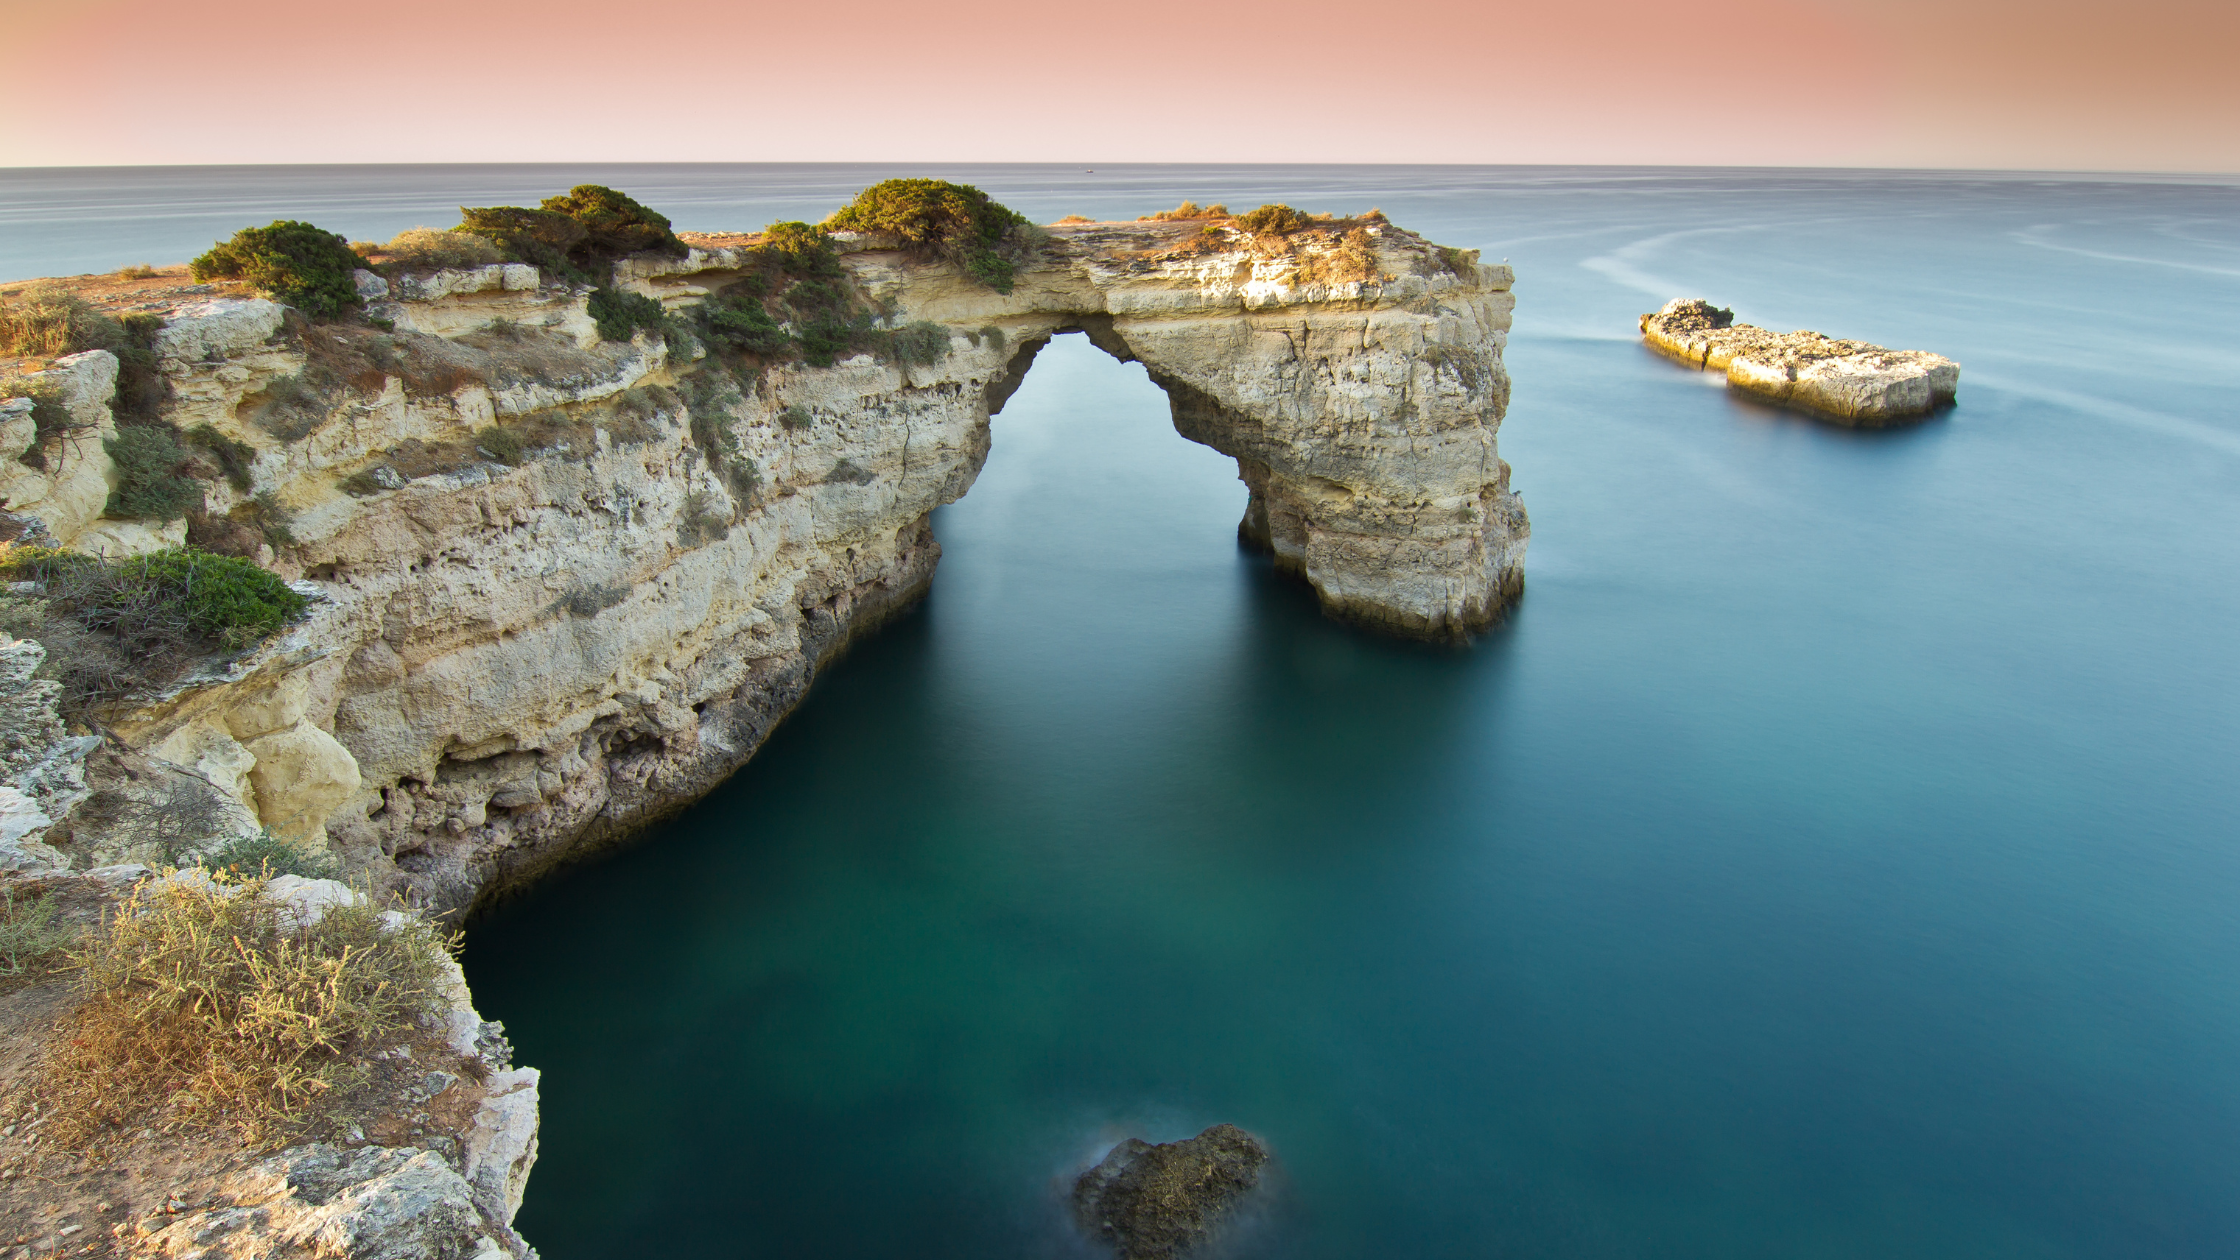 The Ten Most Beautiful Places in Portugal according to Artificial Intelligence